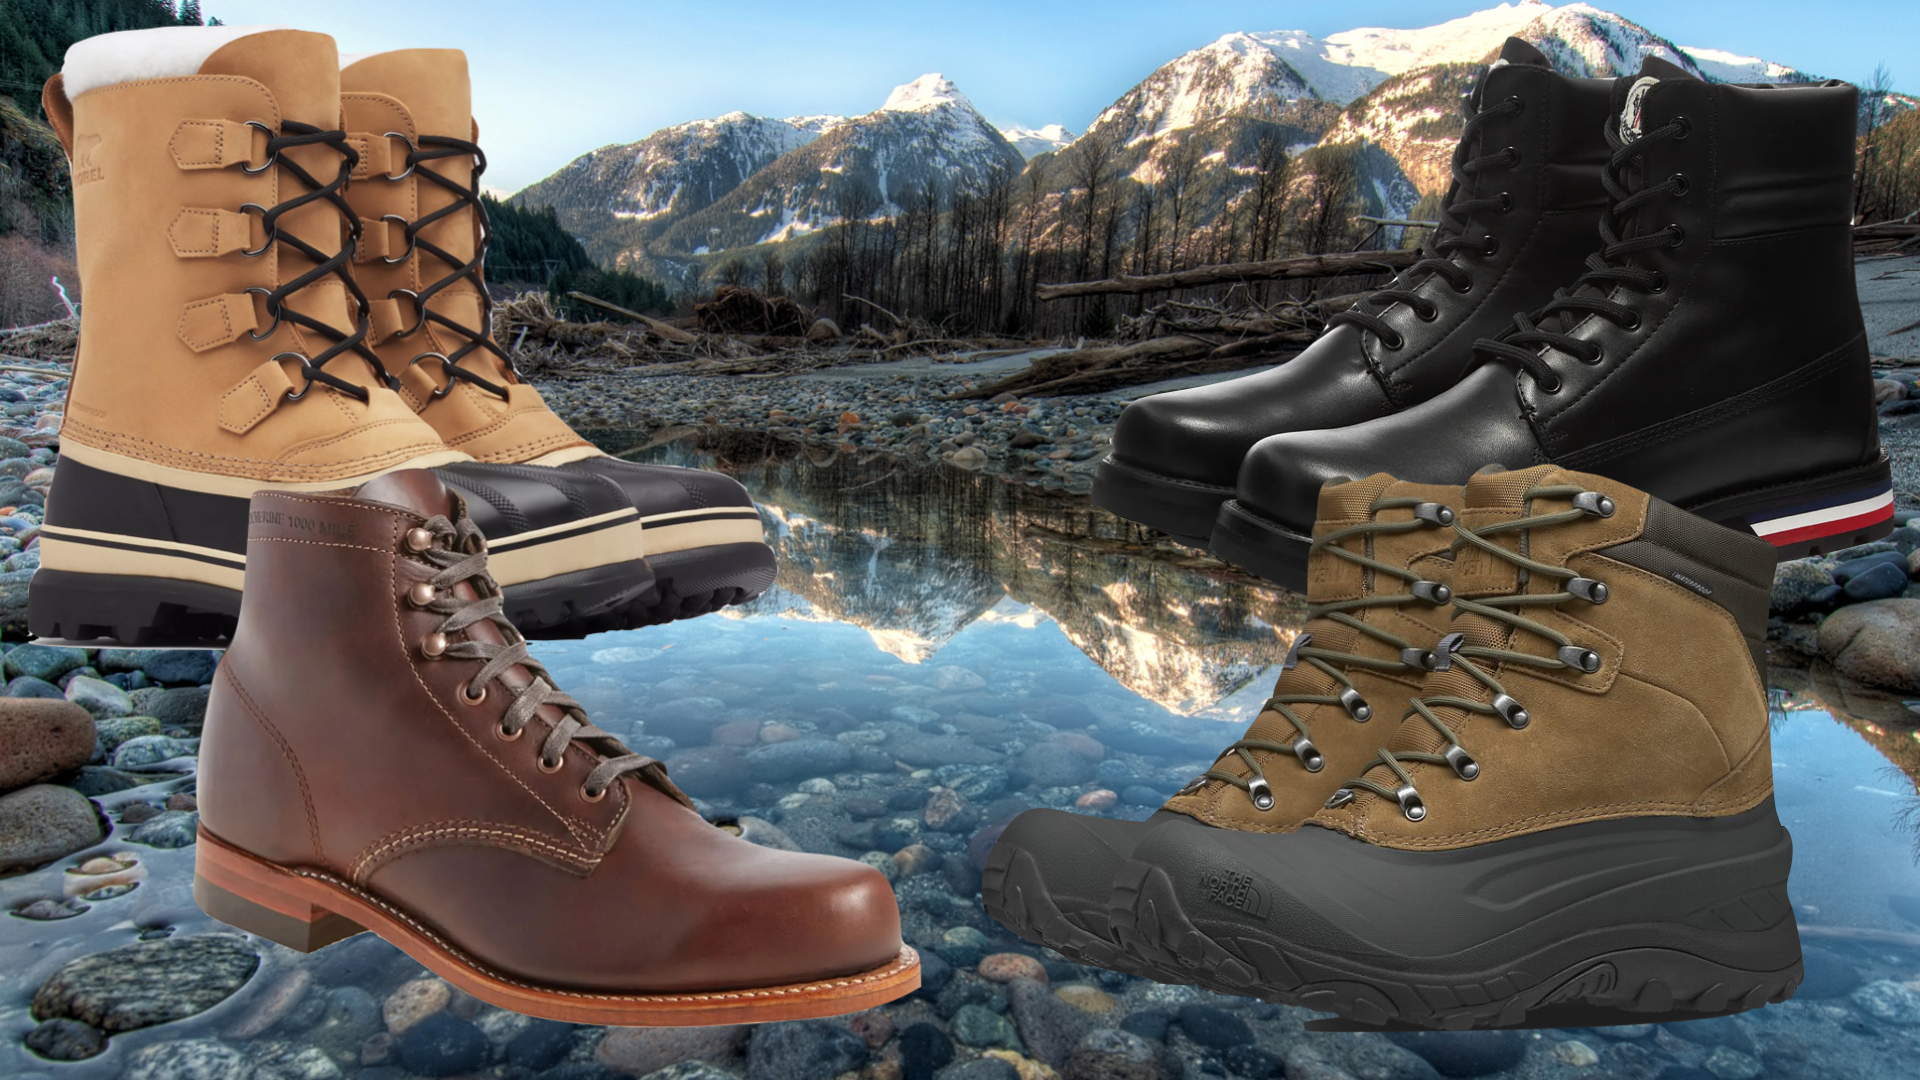 The Best Men’s Winter Boots for Warm Feet This Winter [2022 Guide]